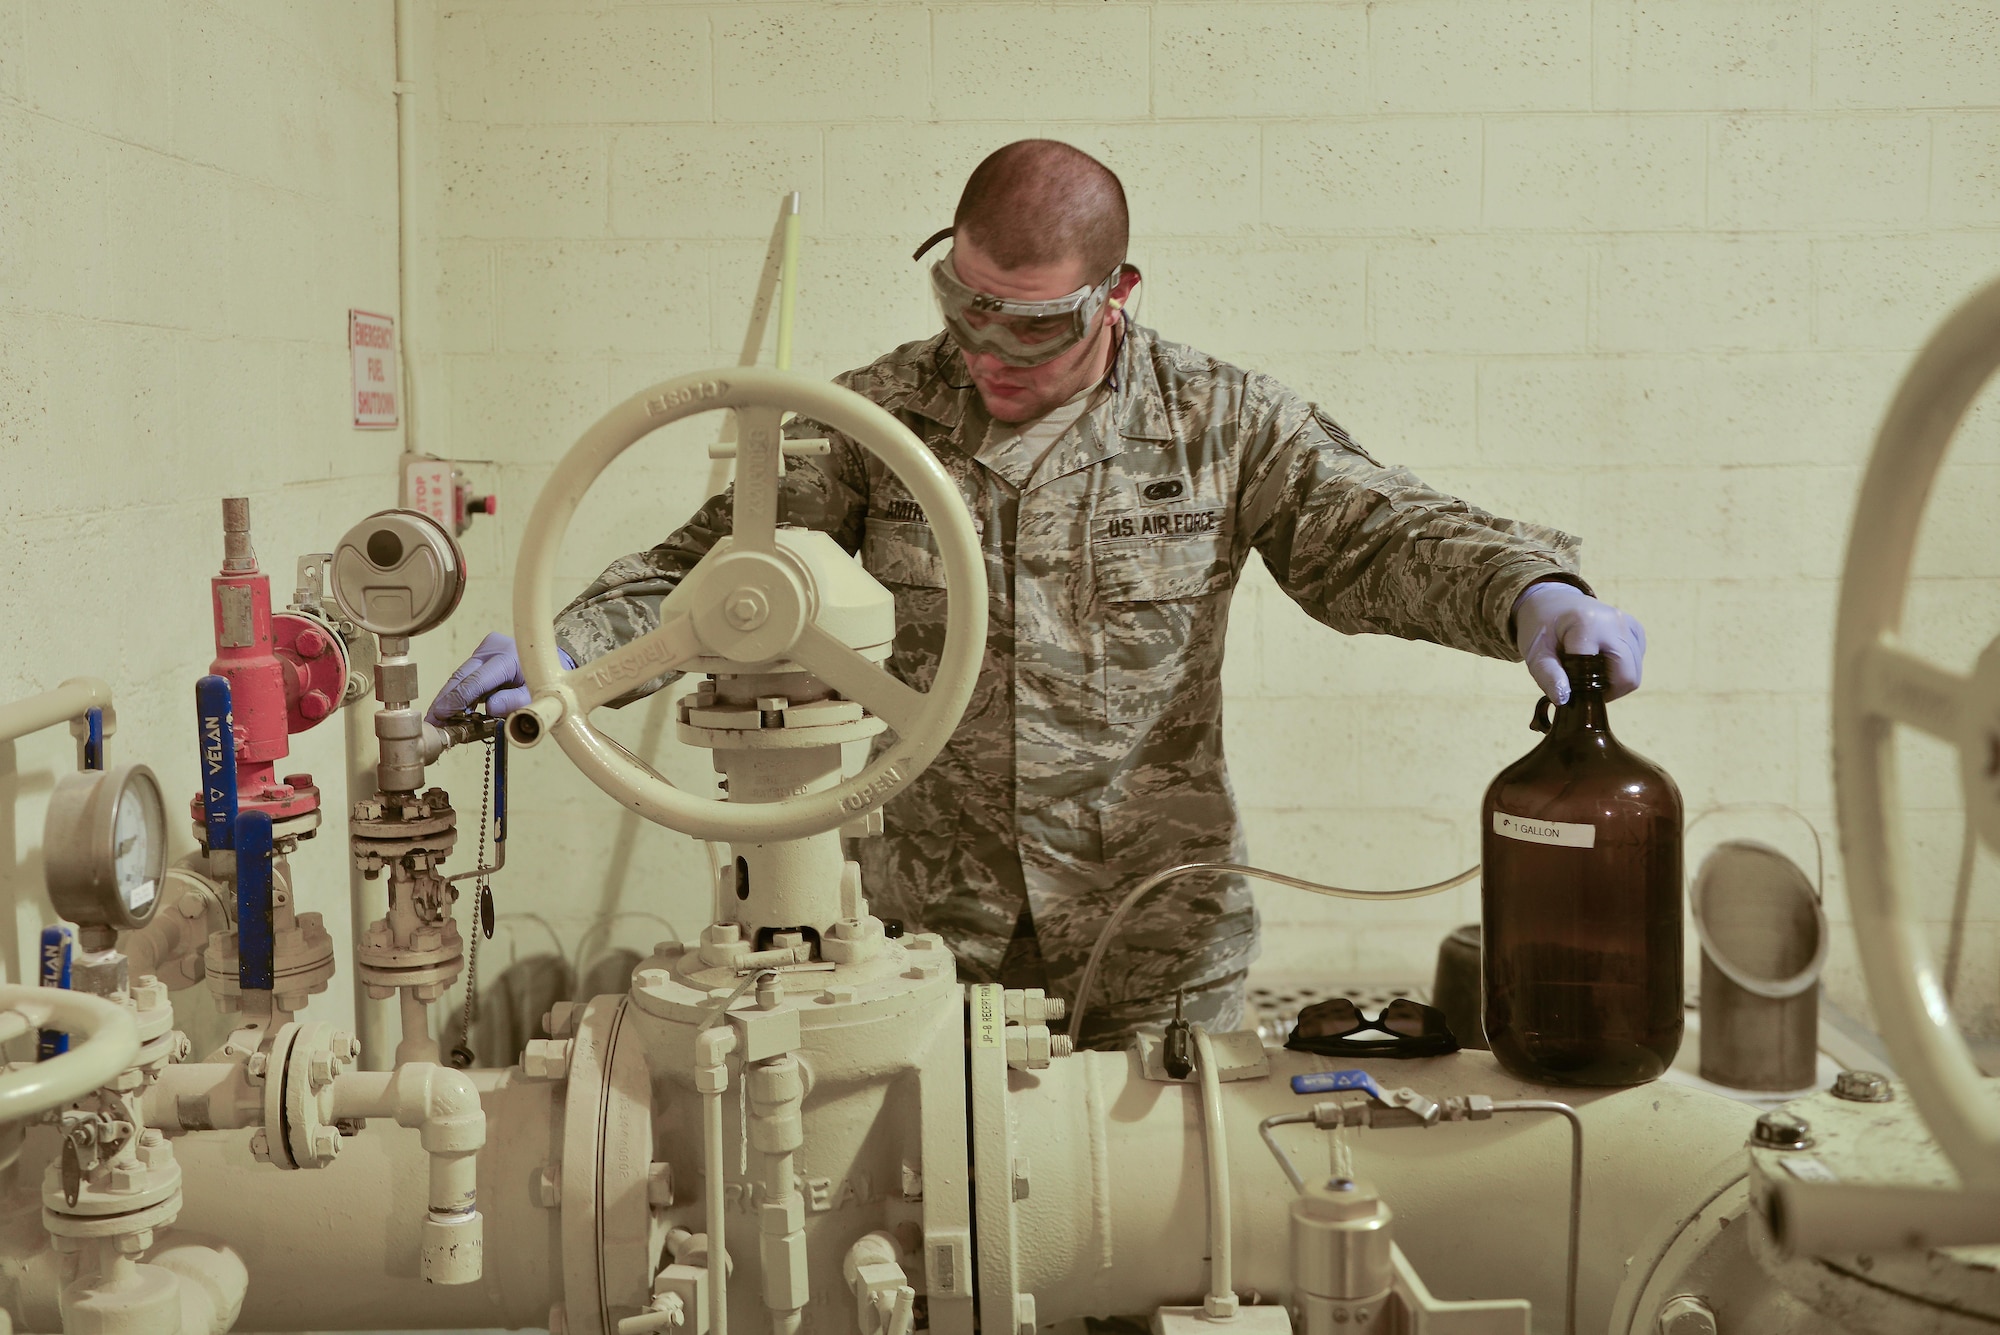 Staff Sgt. David Ramirez, 379th Expeditionary Logistic Readiness fuels laboratory, extracts a sample of jet petroleum 8 from a running pipeline which supplies the aircraft deployed here August 19, 2015 at Al Udeid Air Base, Qatar. The base fuels laboratory at Al Udeid tests all petroleum that is used in aircraft, vehicles and generators throughout the installation to safeguard its quality, performance and safety. (U.S. Air Force photo/ Staff Sgt. Alexandre Montes)